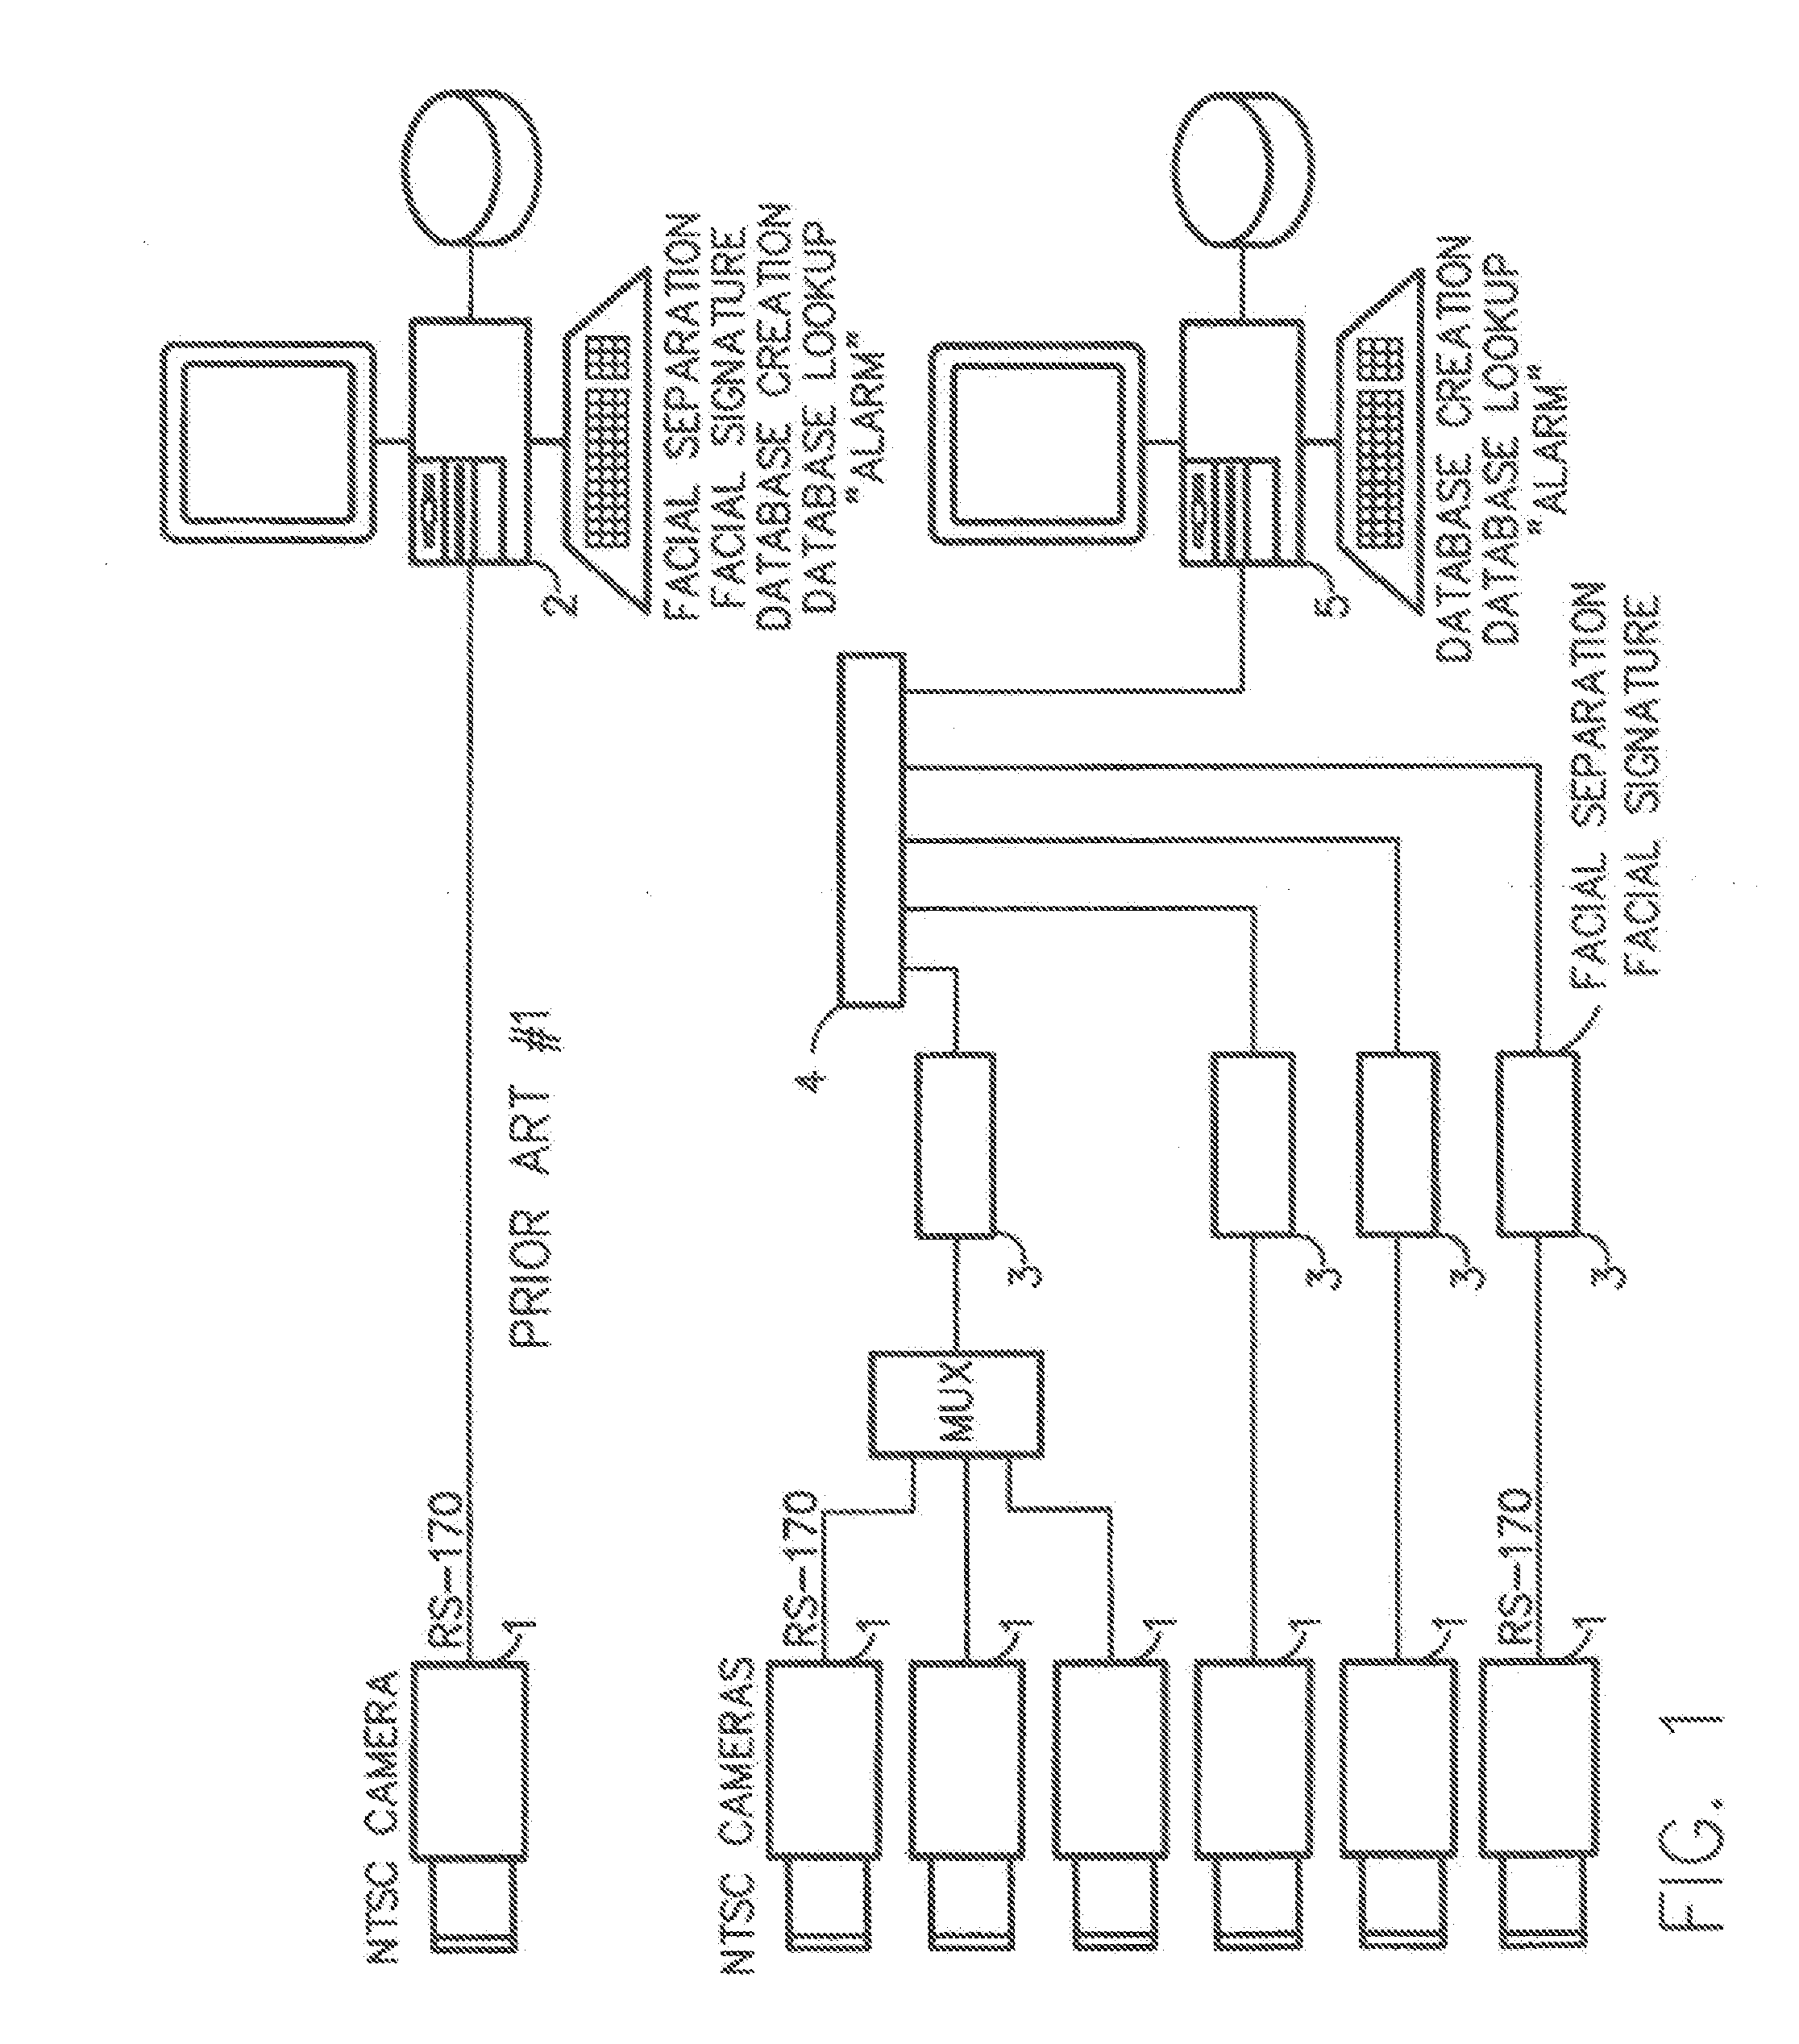 Method for Incorporating Facial Recognition Technology in a Multimedia Surveillance System